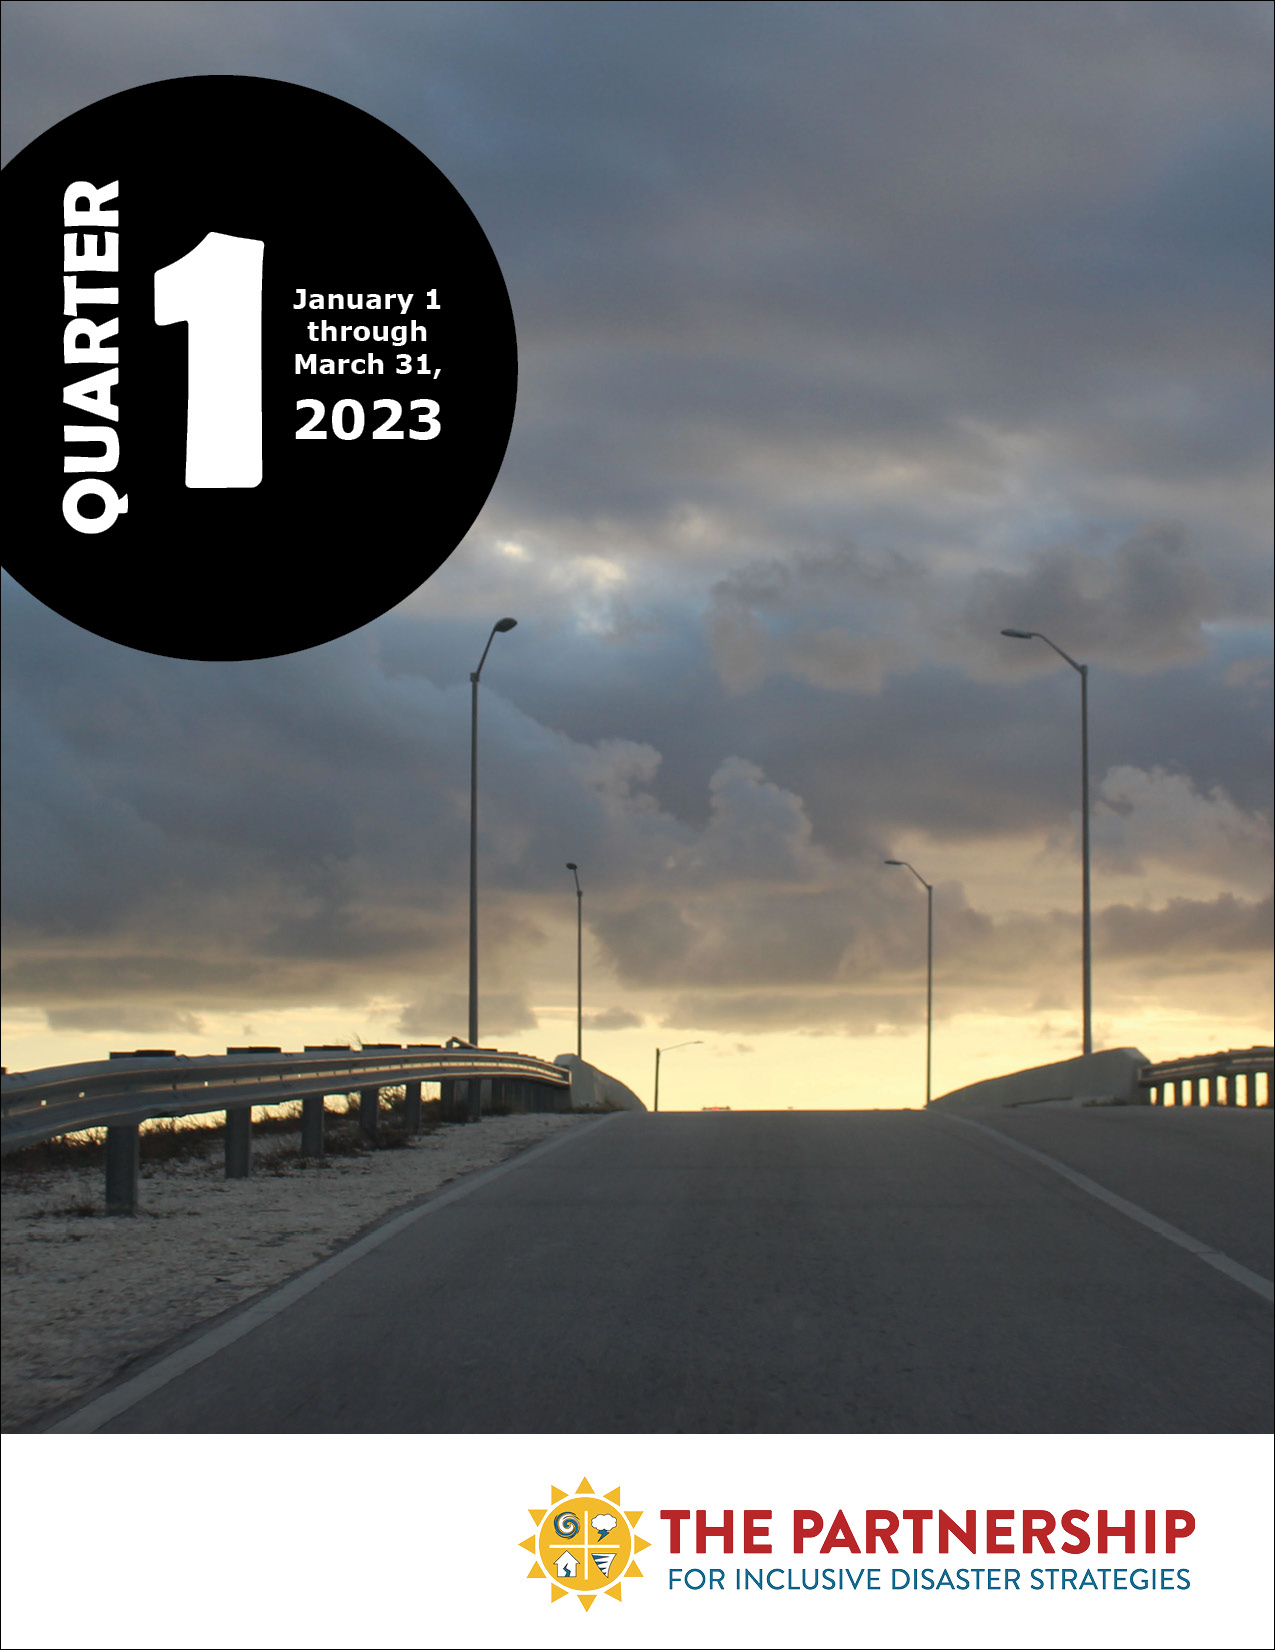 Cover of the 1st Quarter newsletter, featuring a photo of a highway extending into the distance. The sky has ominous dark clouds, but along the horizon are the colors of dawn, and glowing sunlight. In the upper left is a black circle; inside of the circle is text: "Quarter 1. January 1 through March 31, 2023." At the bottom is The Partnership's logo.